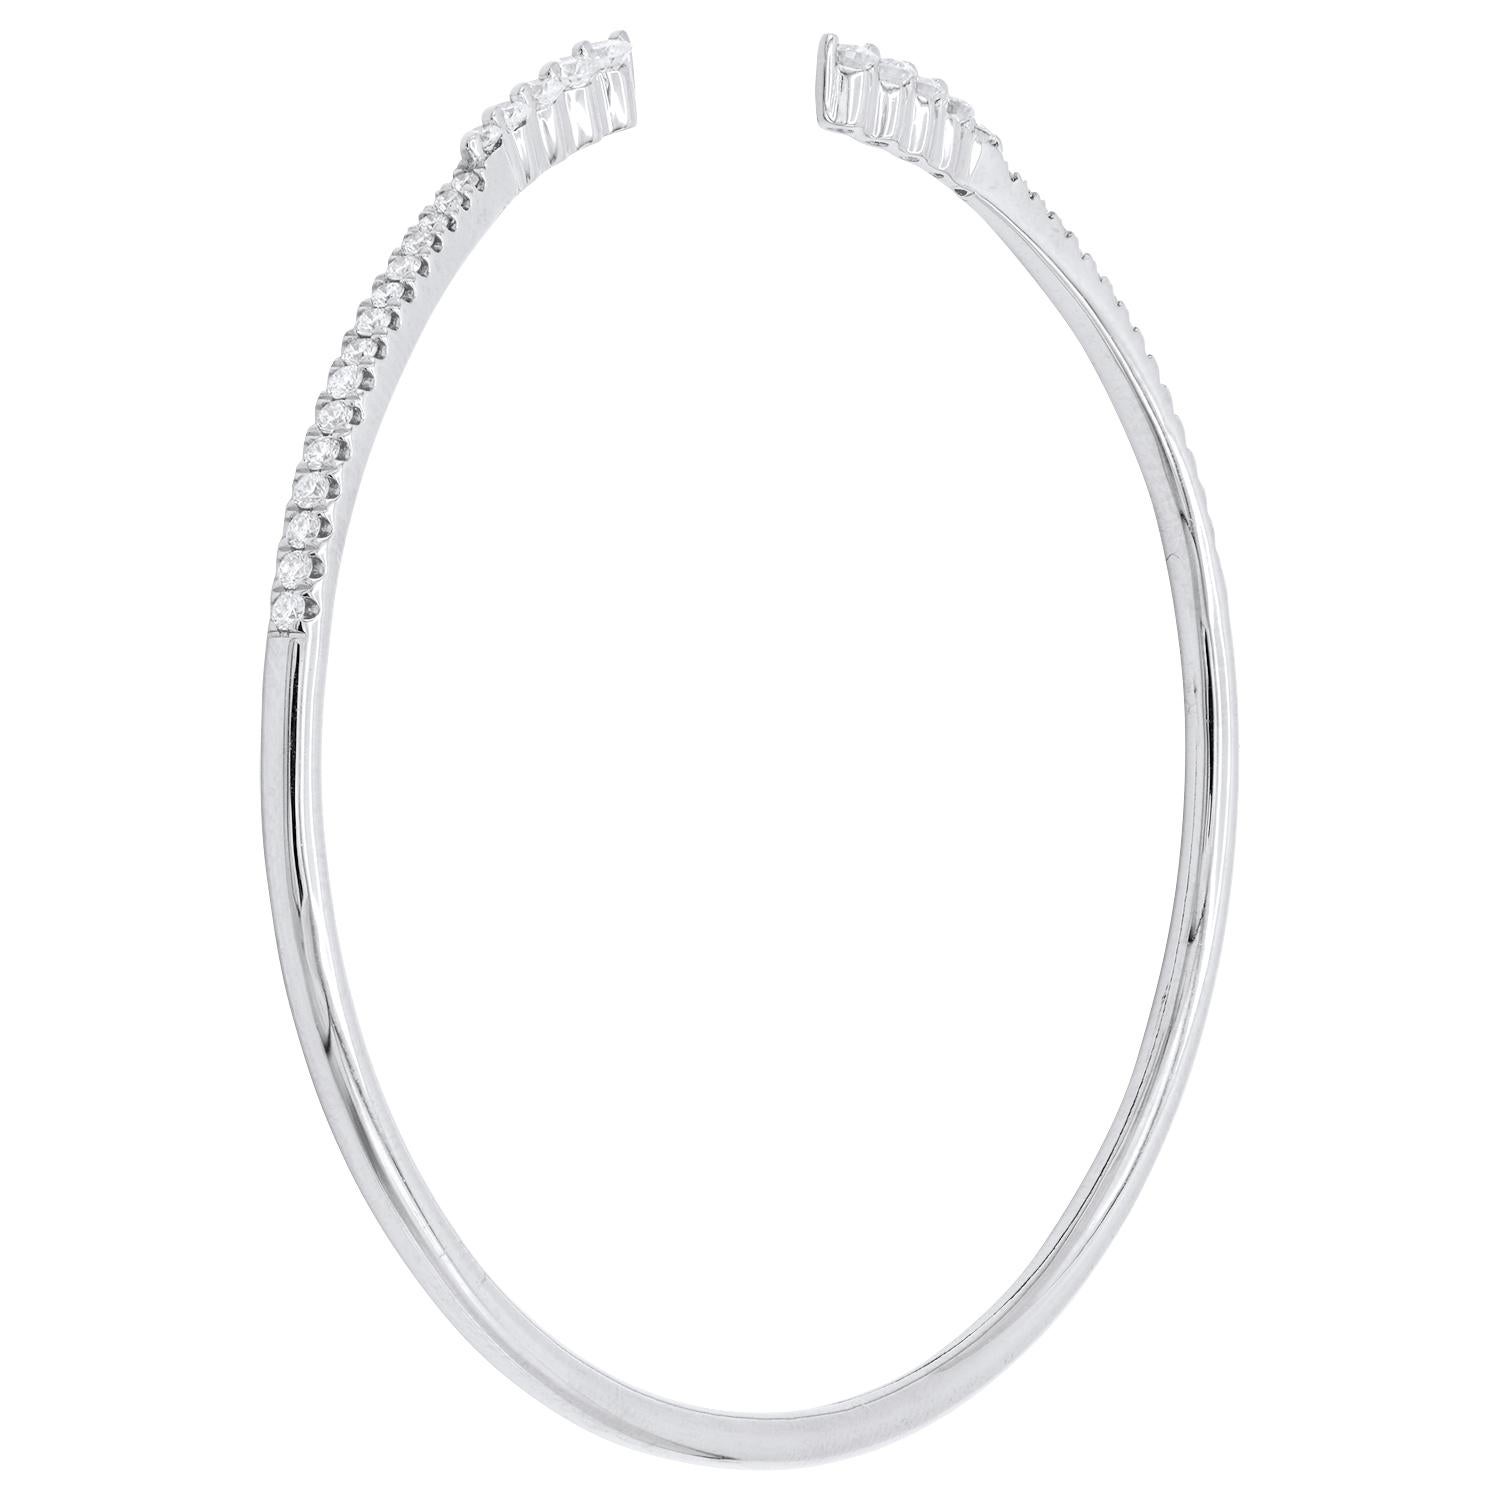 With this exquisite diamond bangle, style and glamour are in the spotlight. This 14-karat white gold flexible bracelet is made from 4.2 grams of gold. The top is adorned with one row of SI1-0SI2, GH color diamonds made out of 40 diamonds totaling